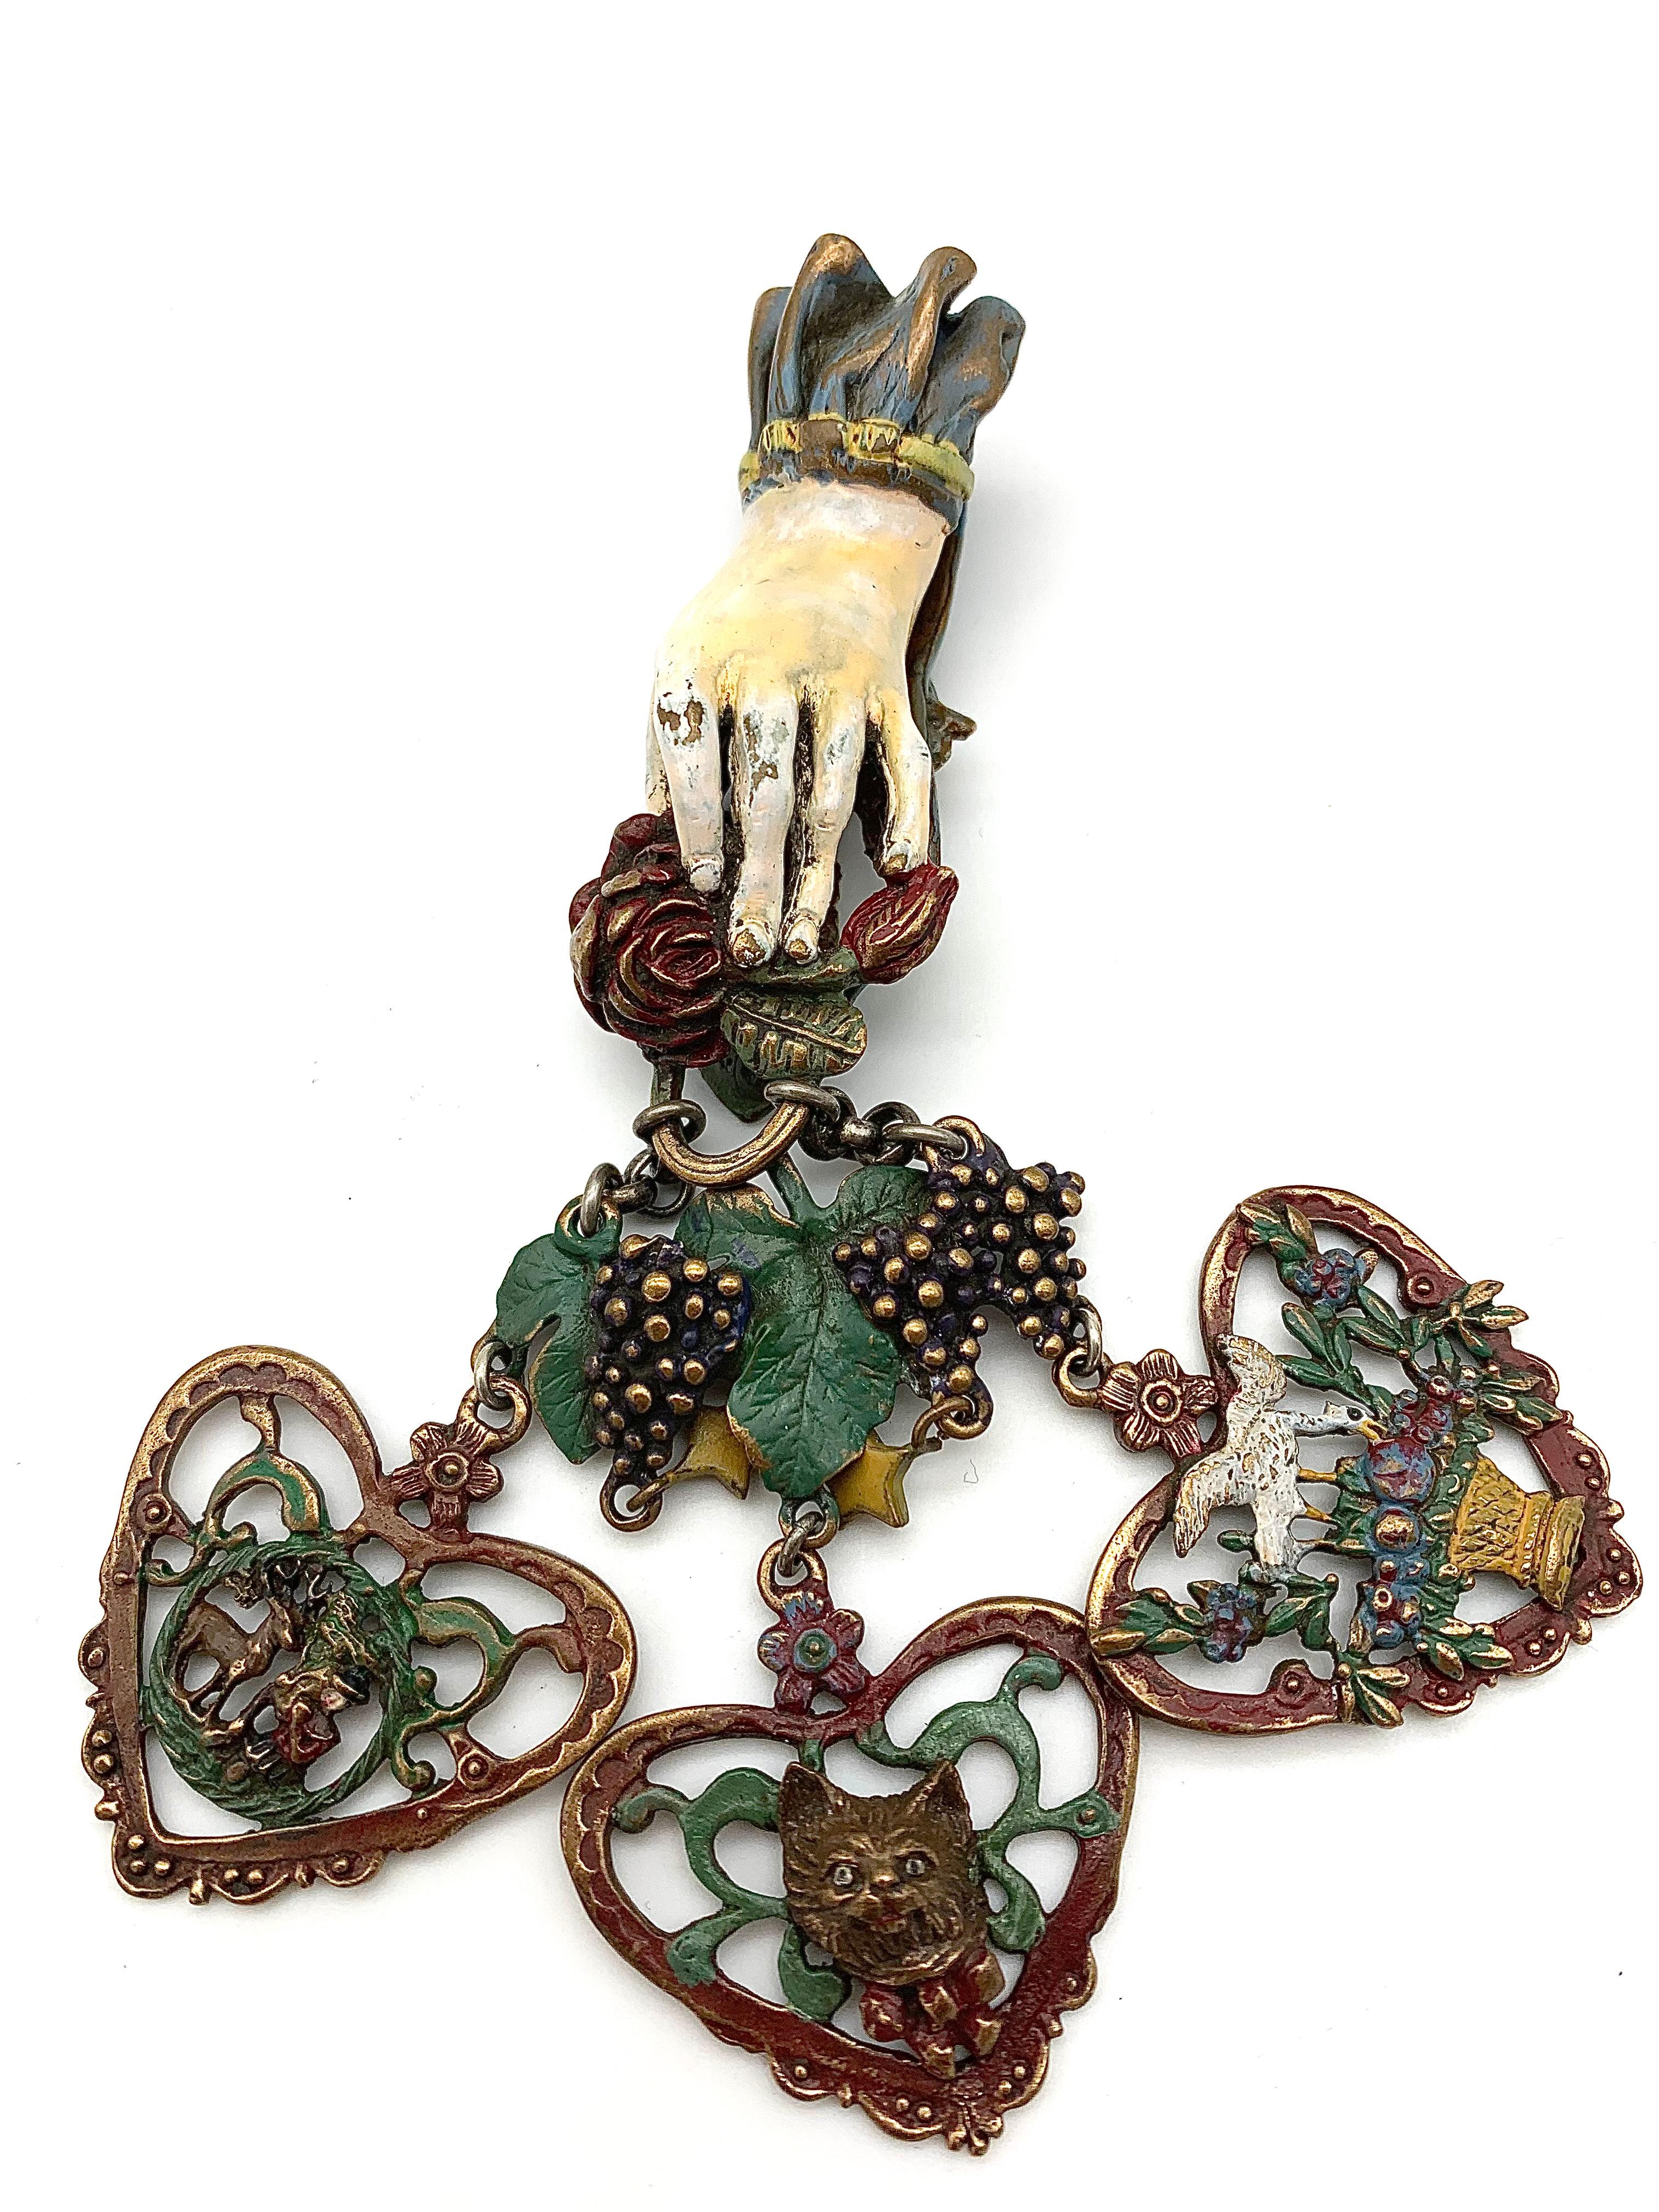 This most extraordinary châtelaine is designed as a delicately modelled hand coming out of a cuff holding a rose and a rose bud. Suspended from the rose are two chains that hold wine leaves and grapes. Attached to the vine leaves and grapes are a